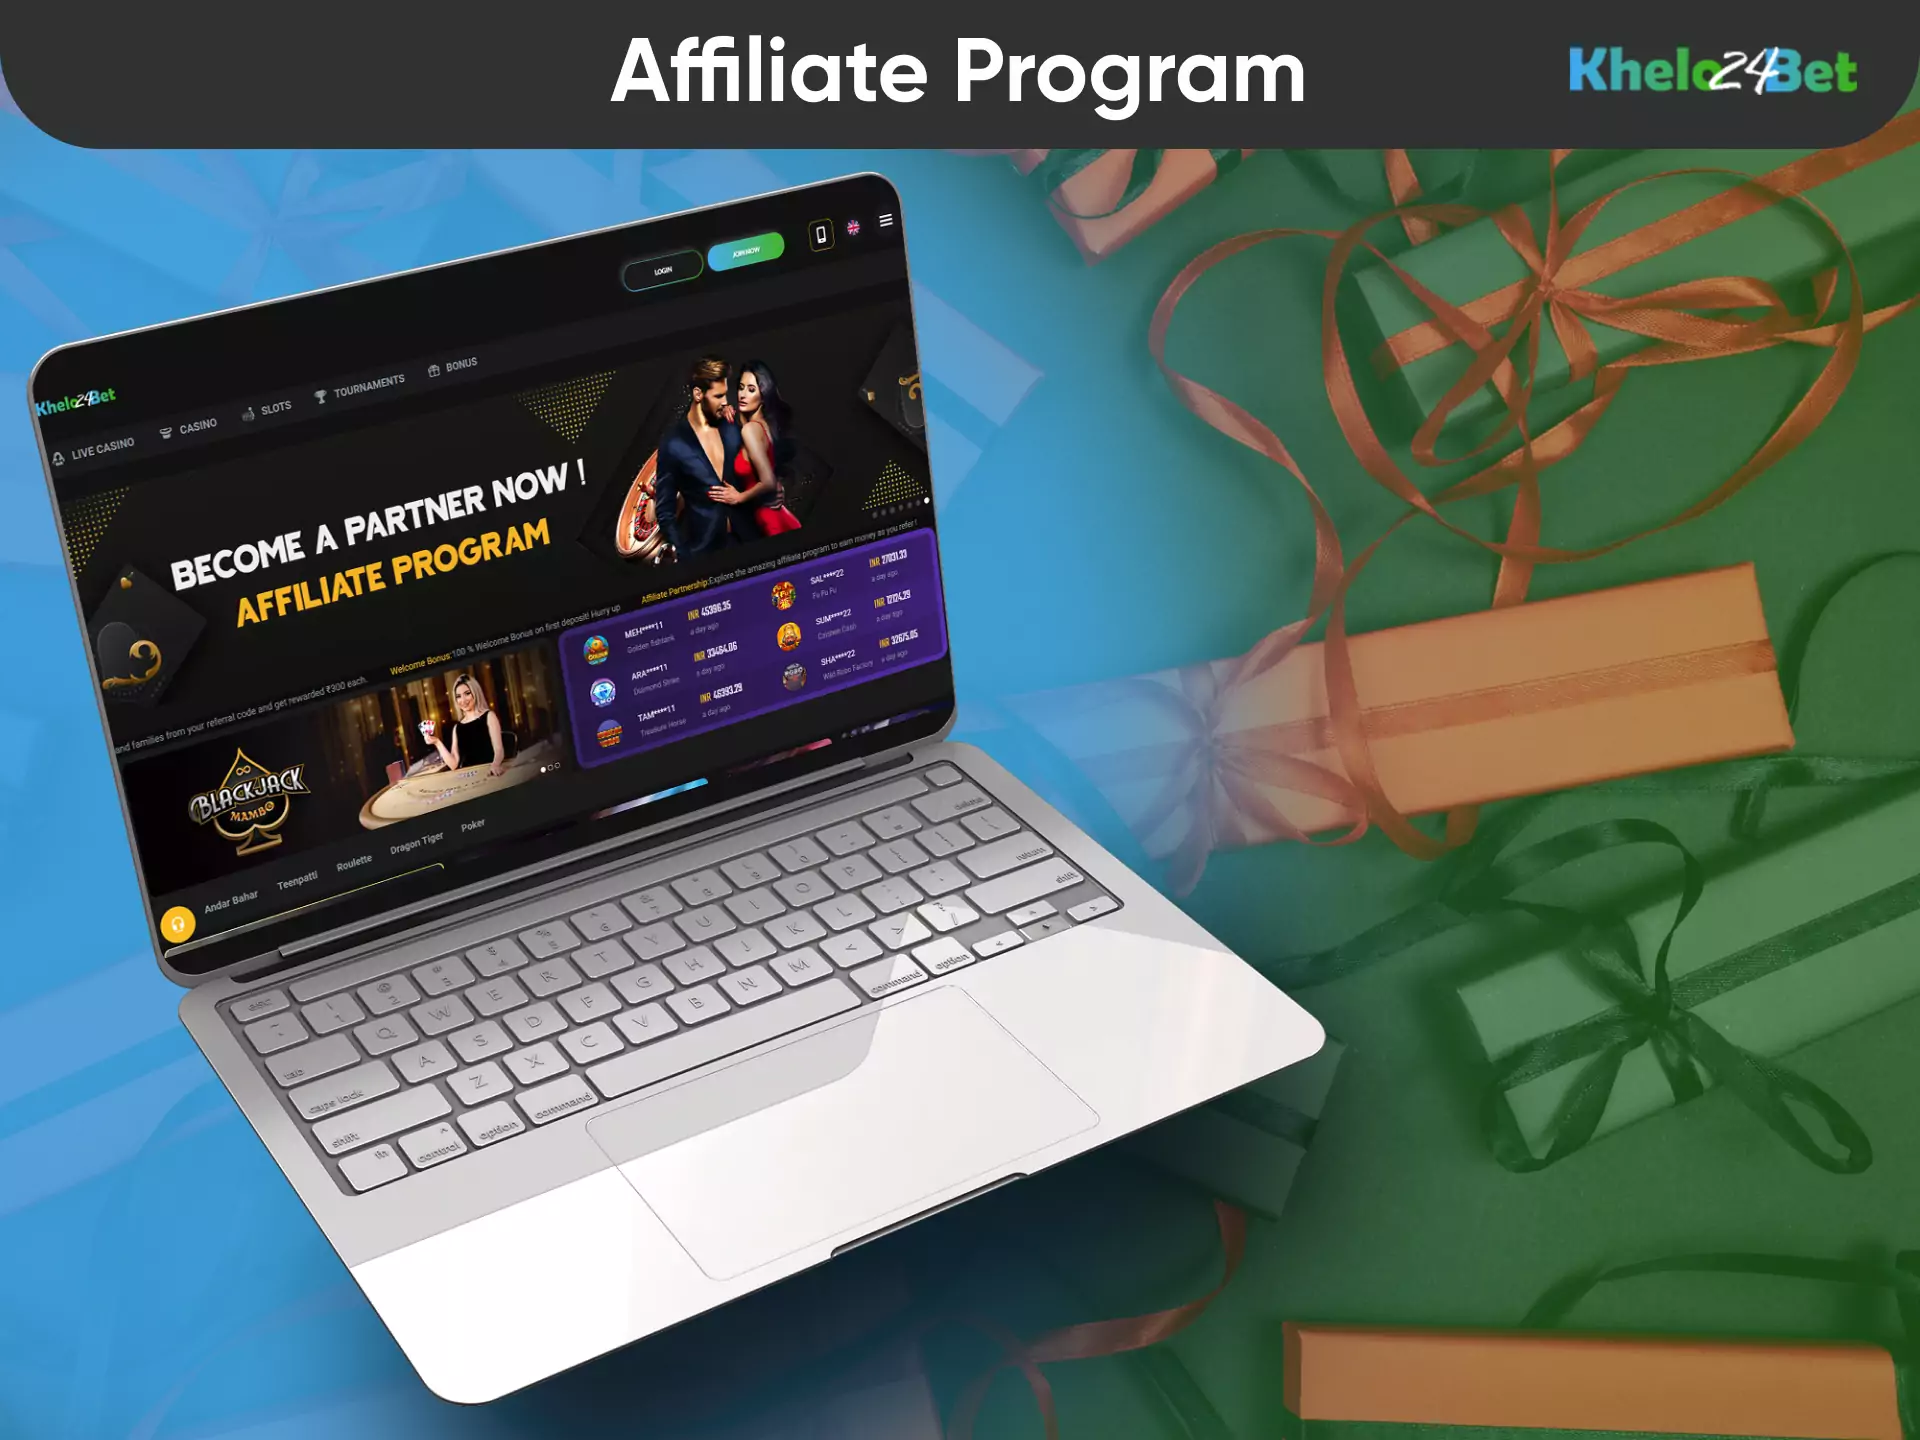 Learn more about the Khelo24bet affiliate program to get bonuses for inviting friends.